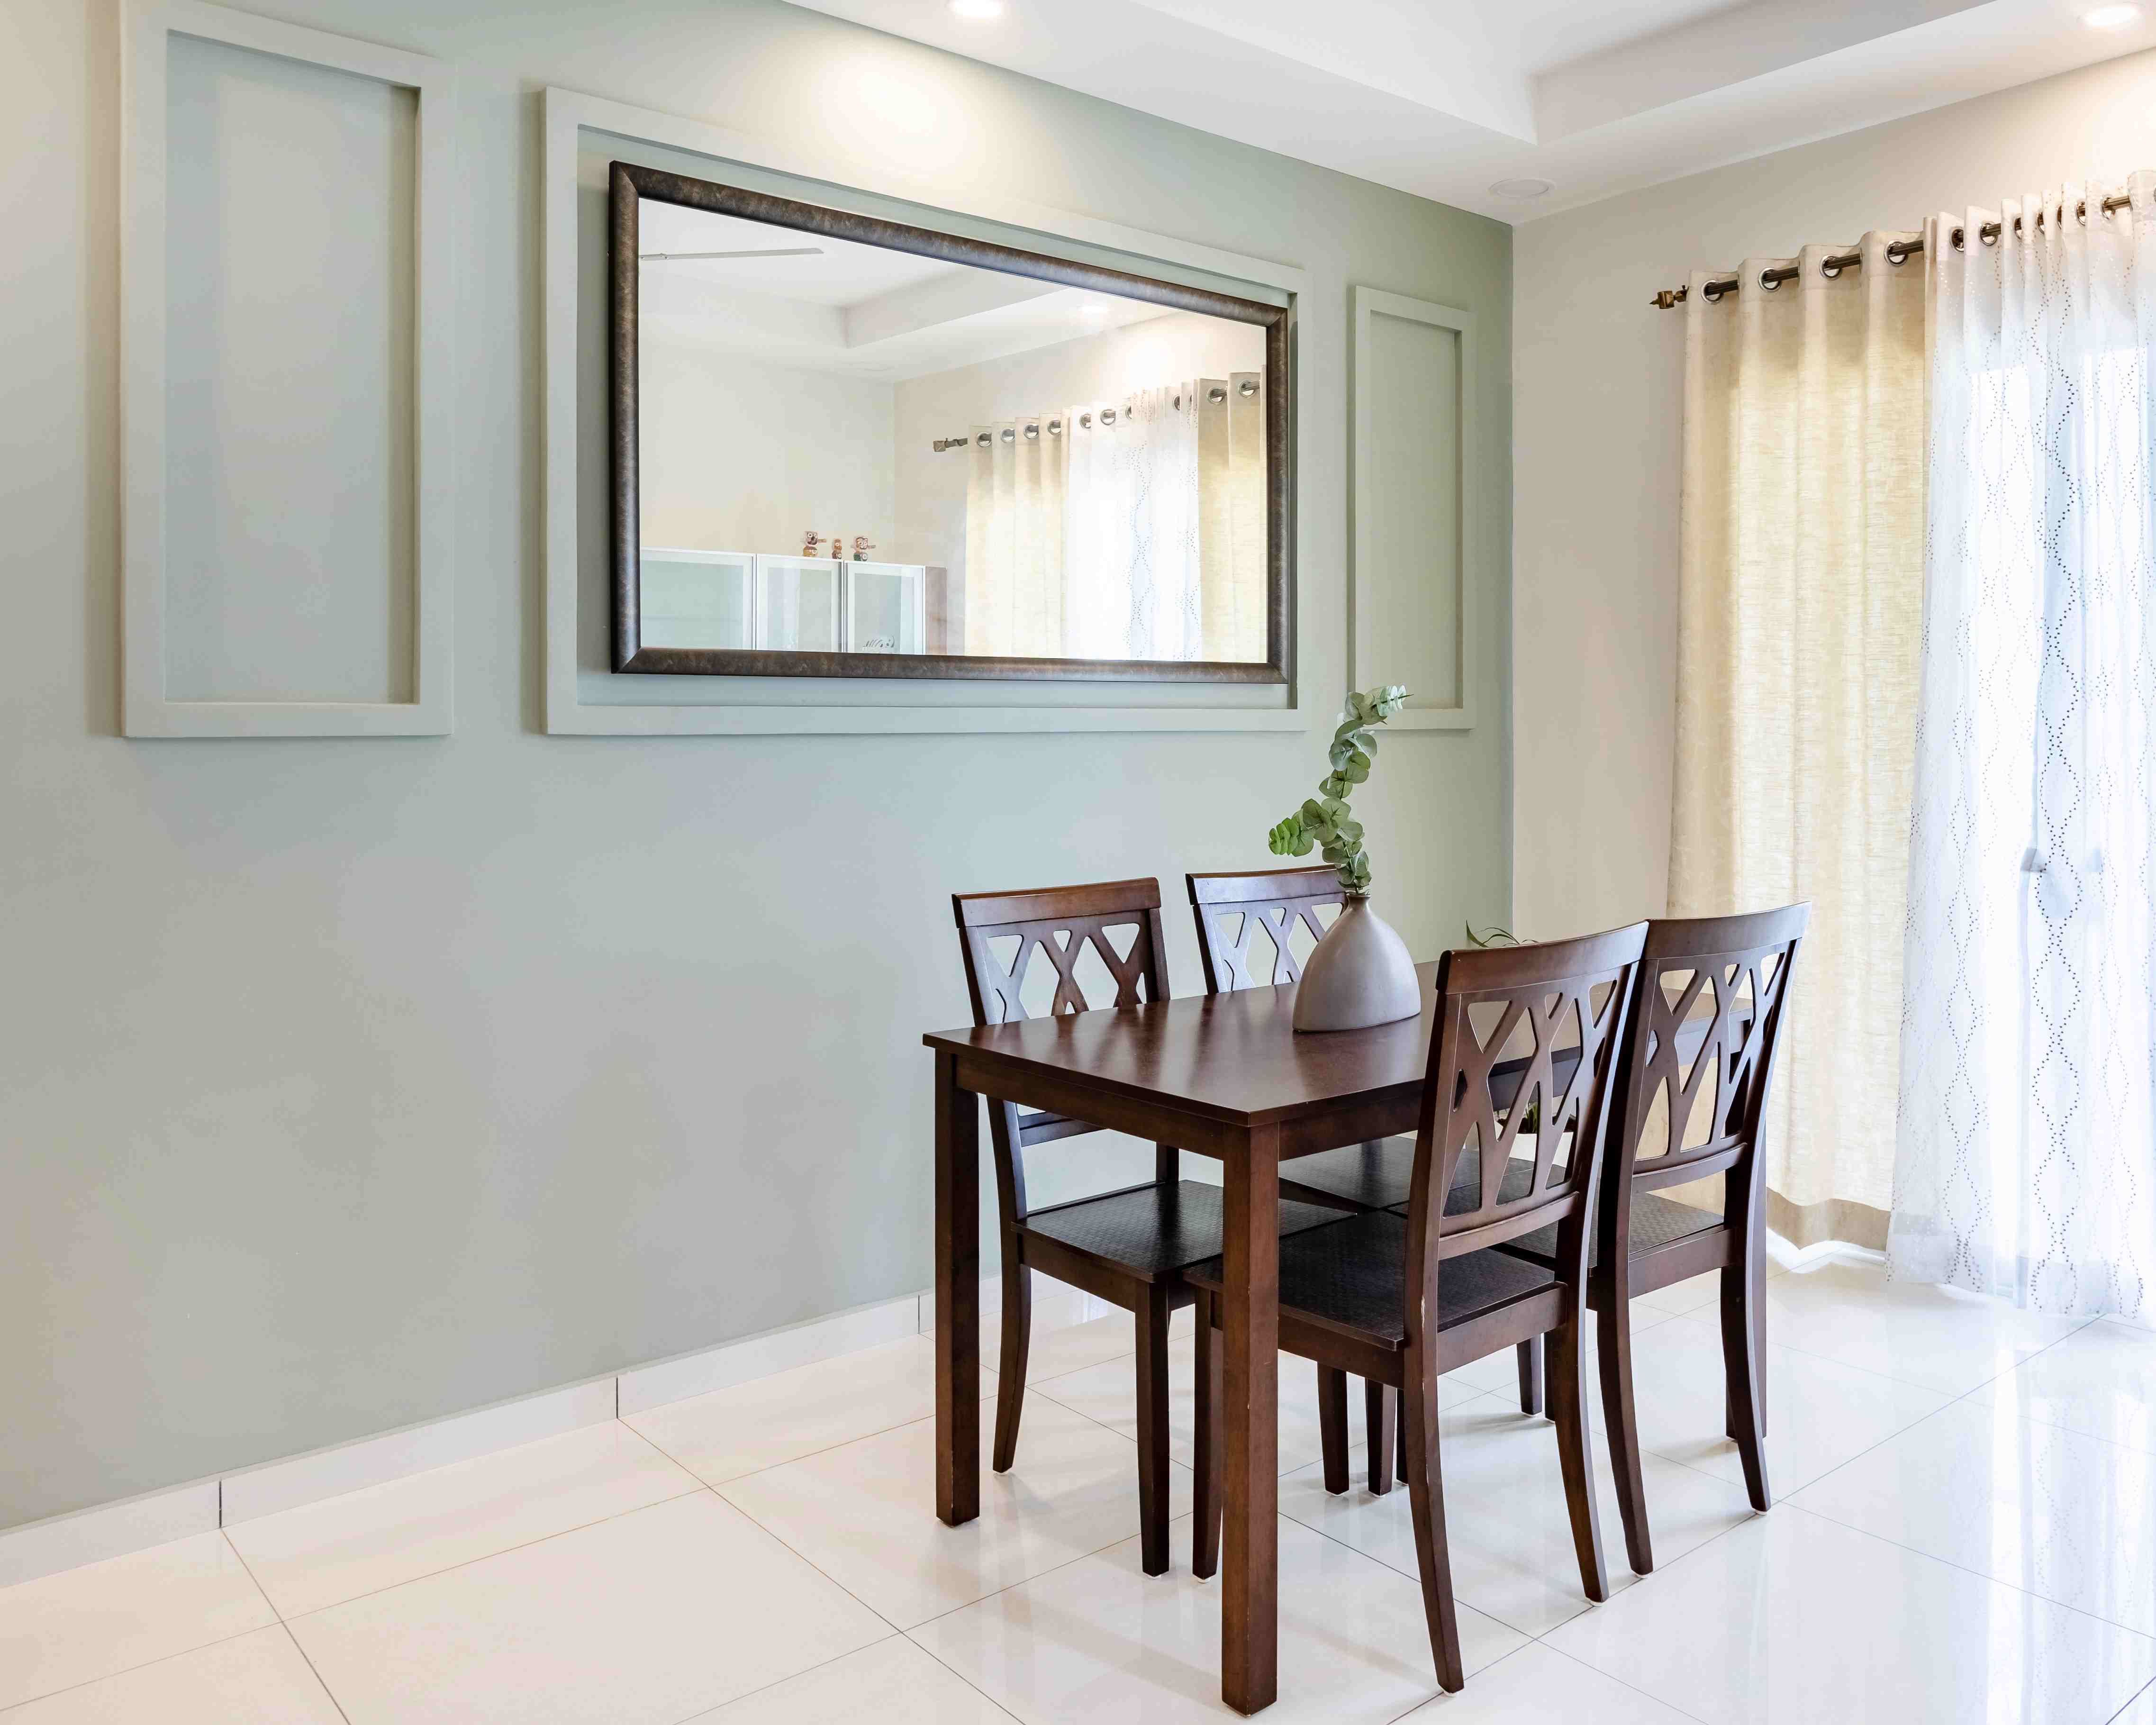 Modern Dining Room Wall Design With A Rectangular Mirror